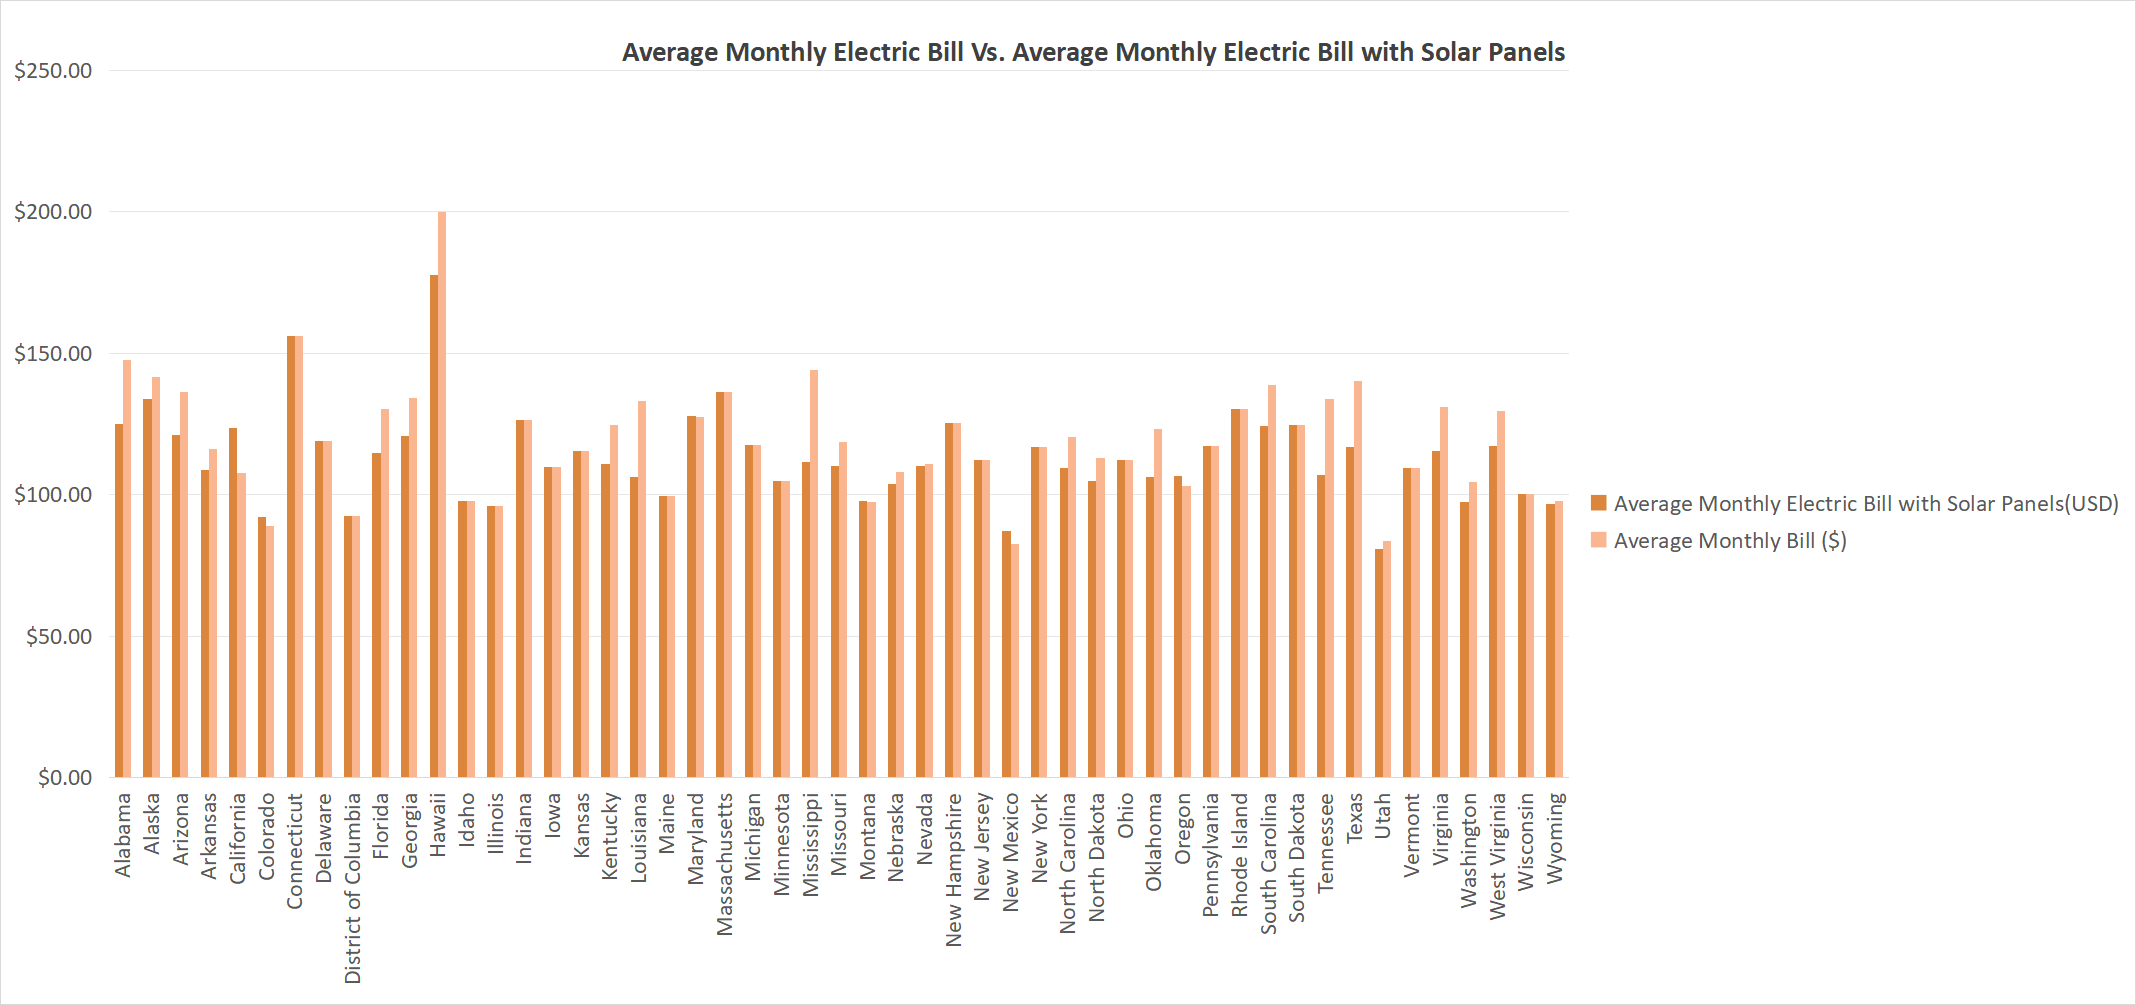 Average Monthly Electric Bill Vs. Average Monthly Electric Bill with Solar Panels